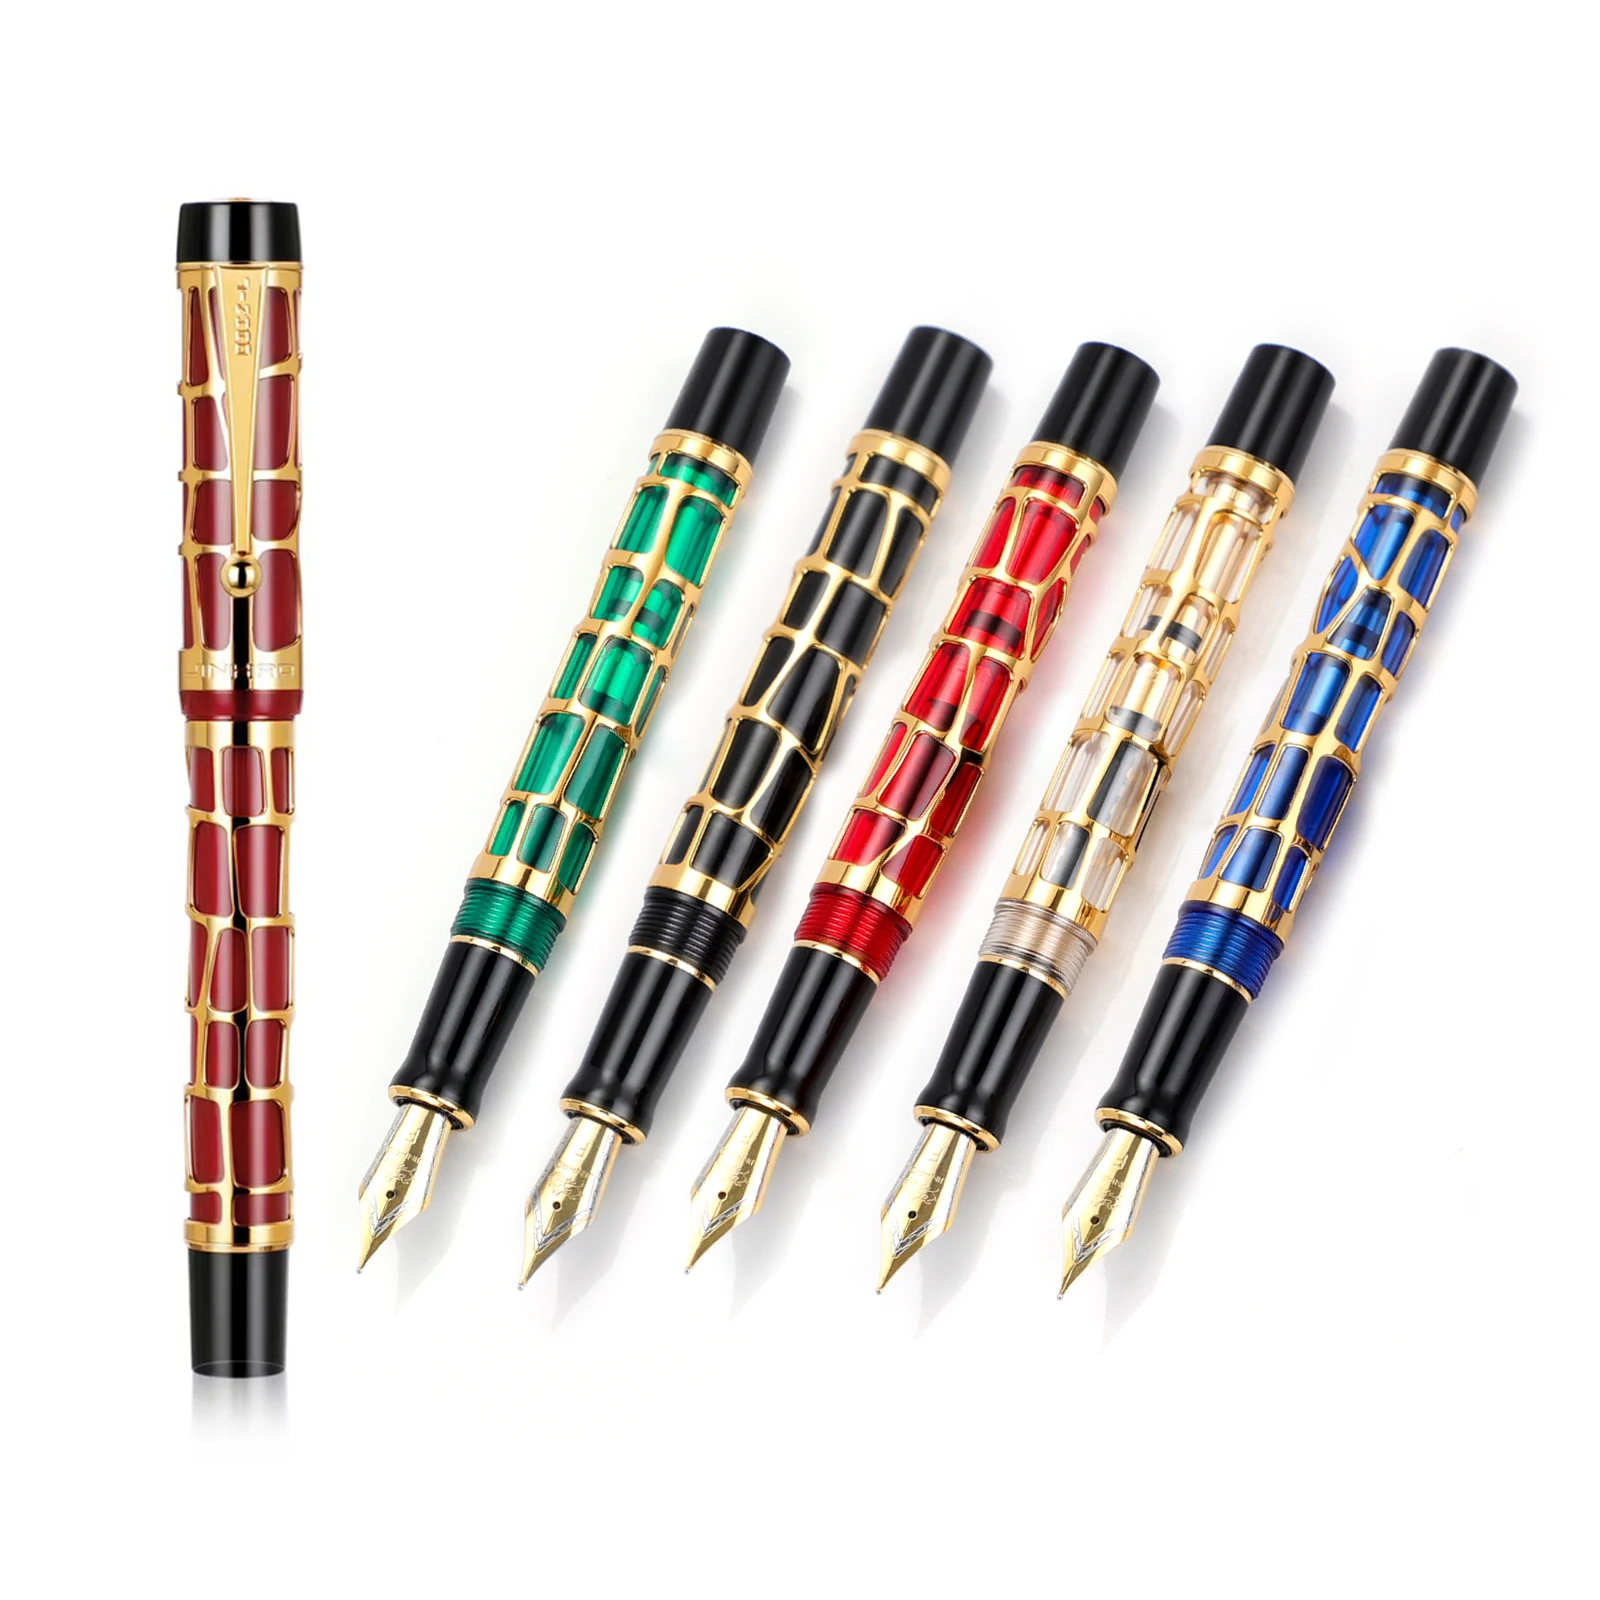 Jinhao Century 100 Fountain Pen Electroplating Gold Hollow Writing Ink Pens EF 0.4mm Nib for Business Office supplies gift pens mid century modern gift wrapping paper book